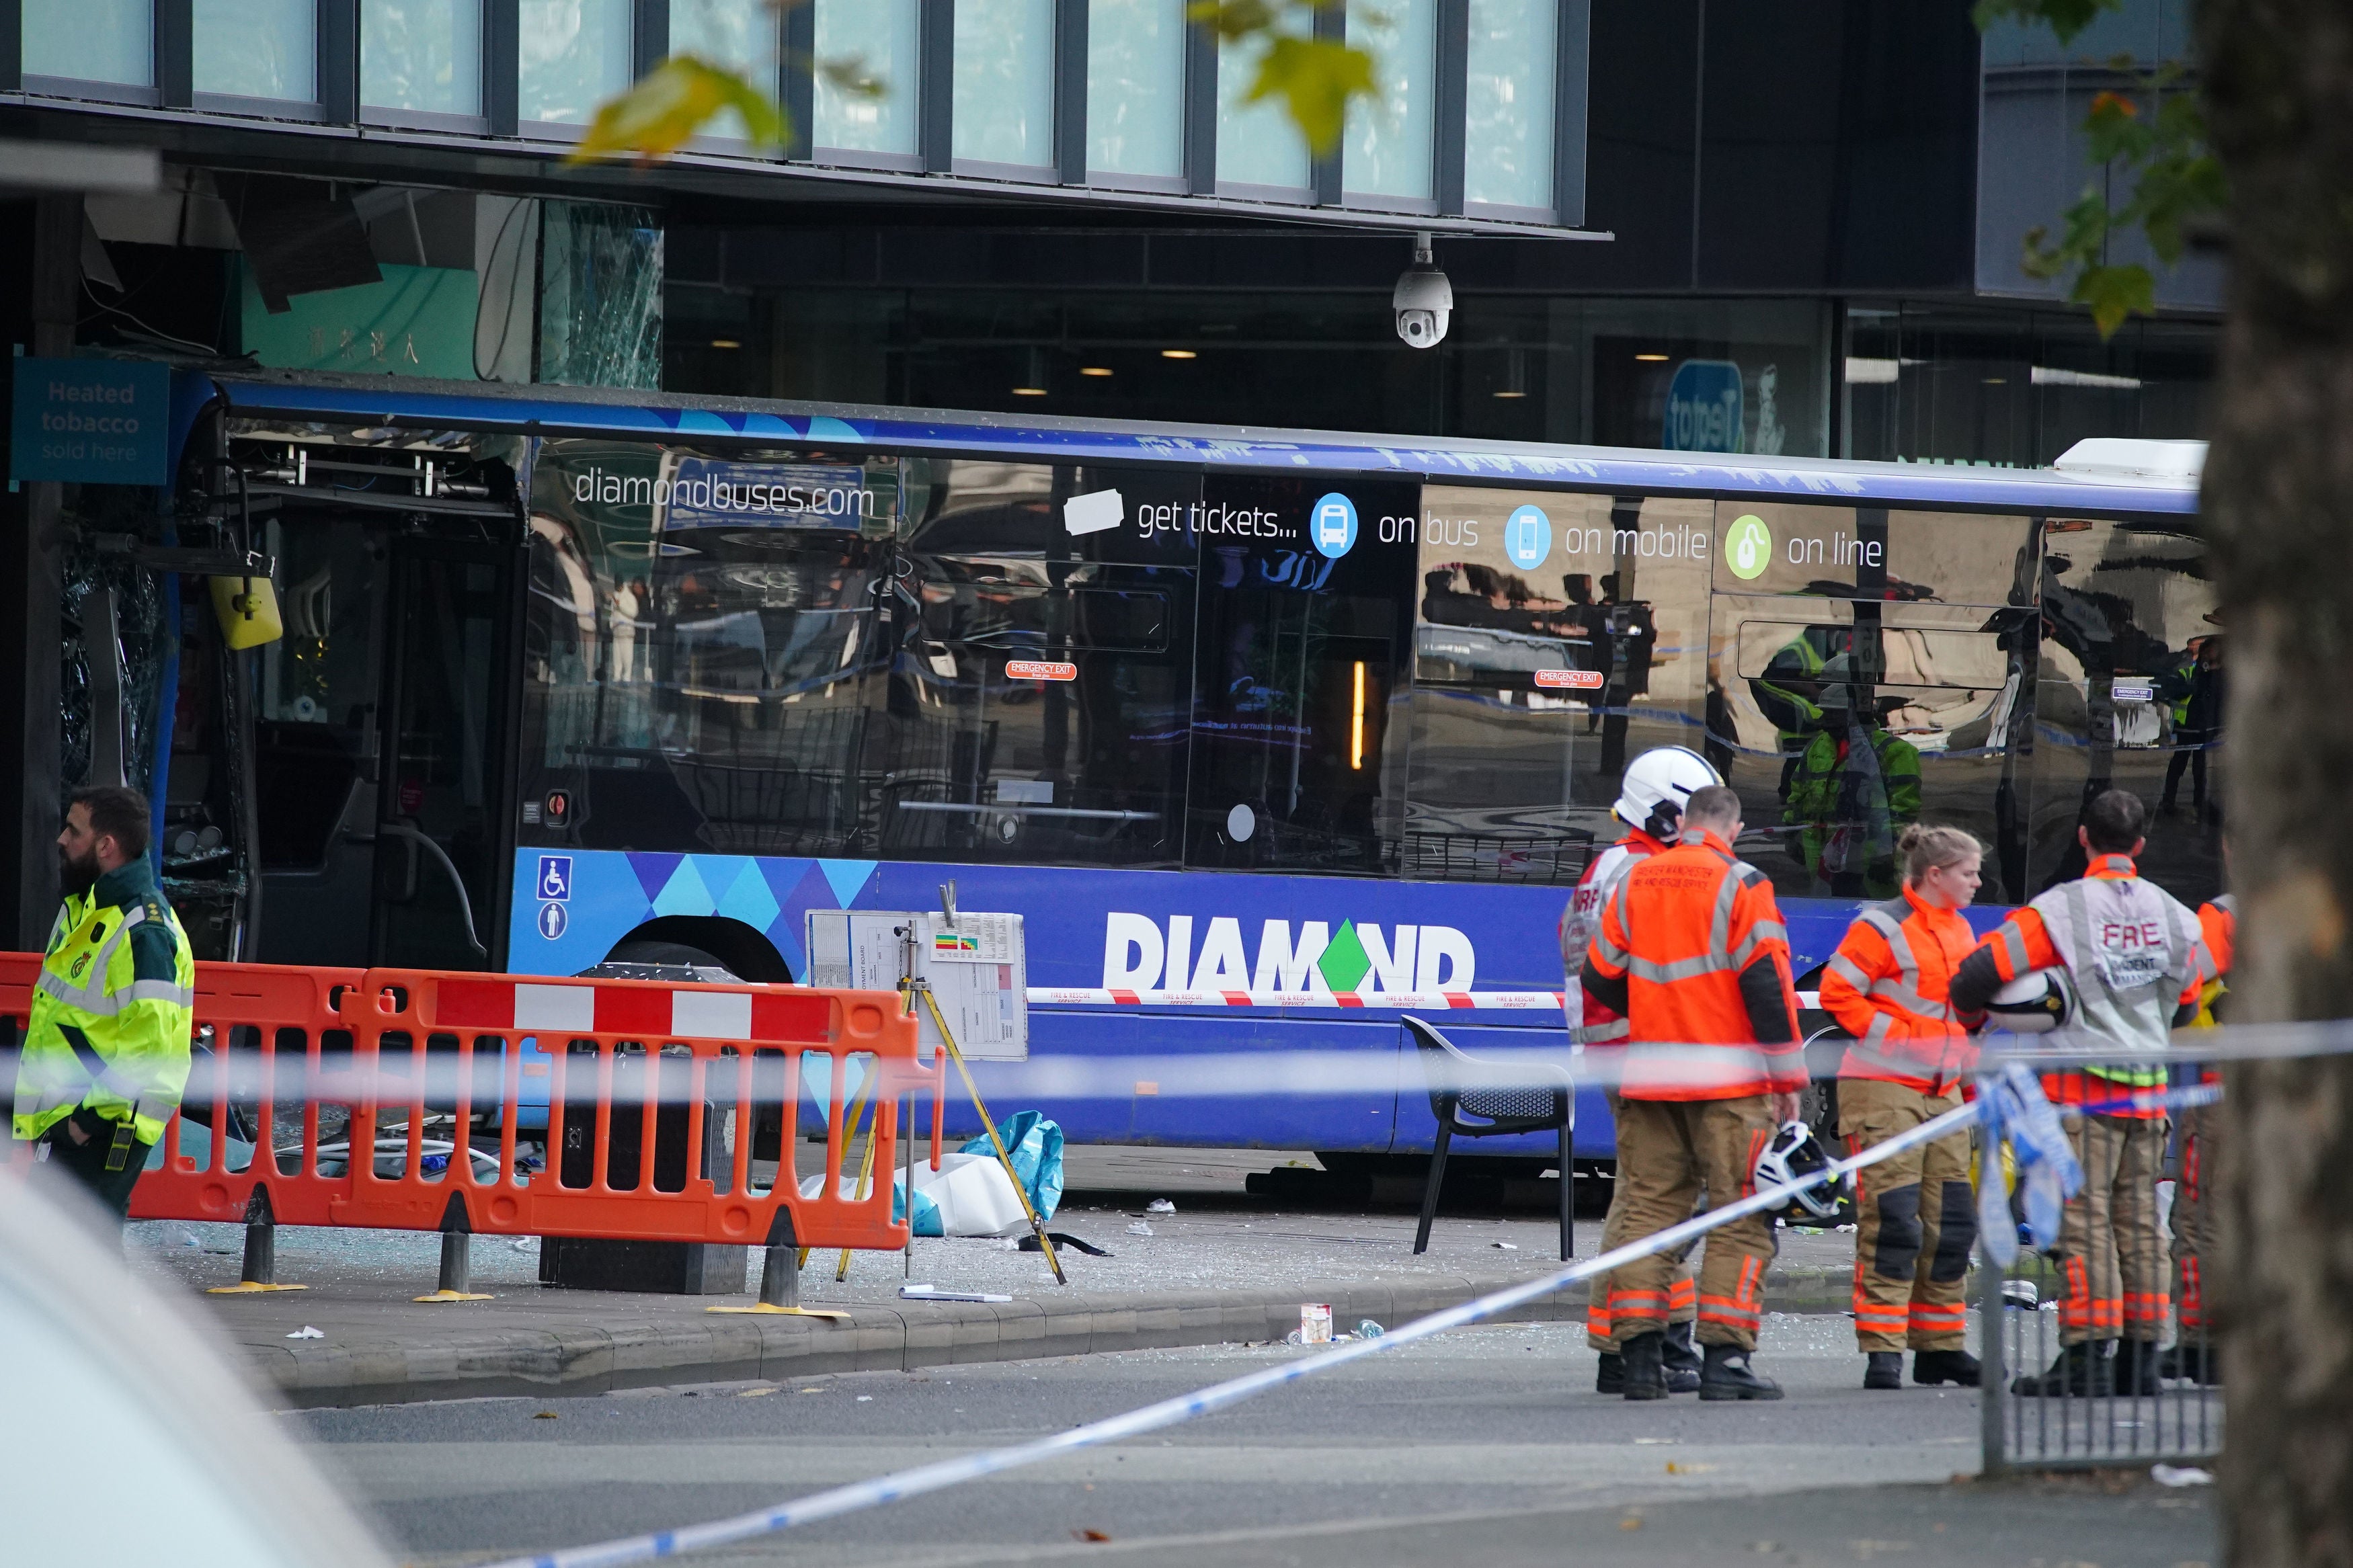 Scene of the diamond bus which crashed into a bubble tea shop this afternoon